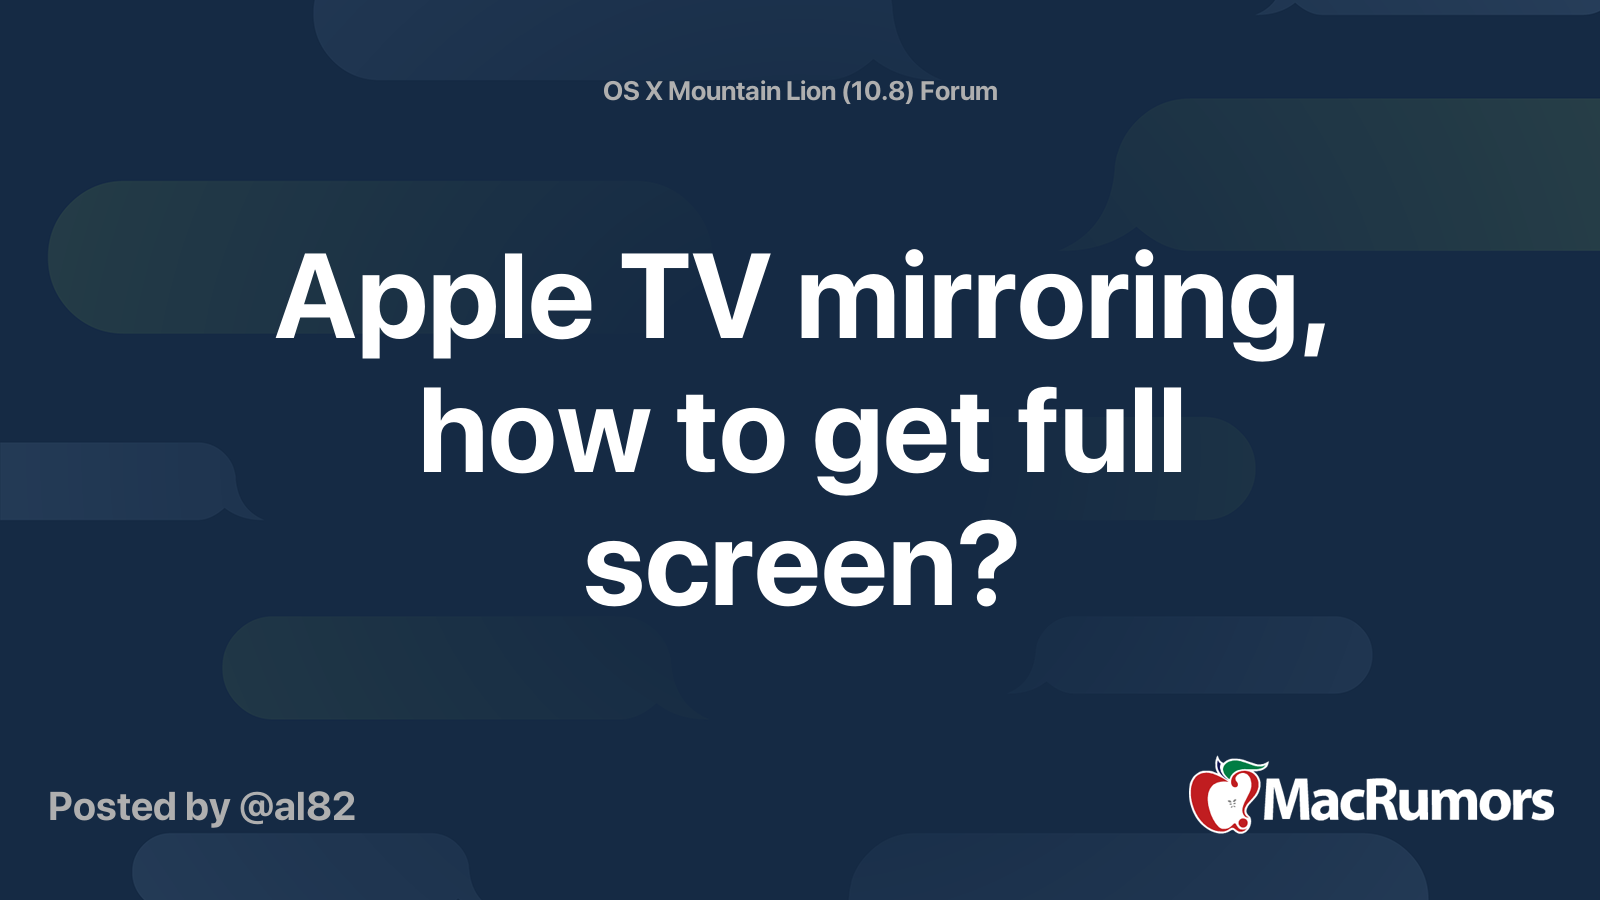 Apple Tv Mirroring How To Get Full, How To Get Full Screen Mirroring On Apple Tv